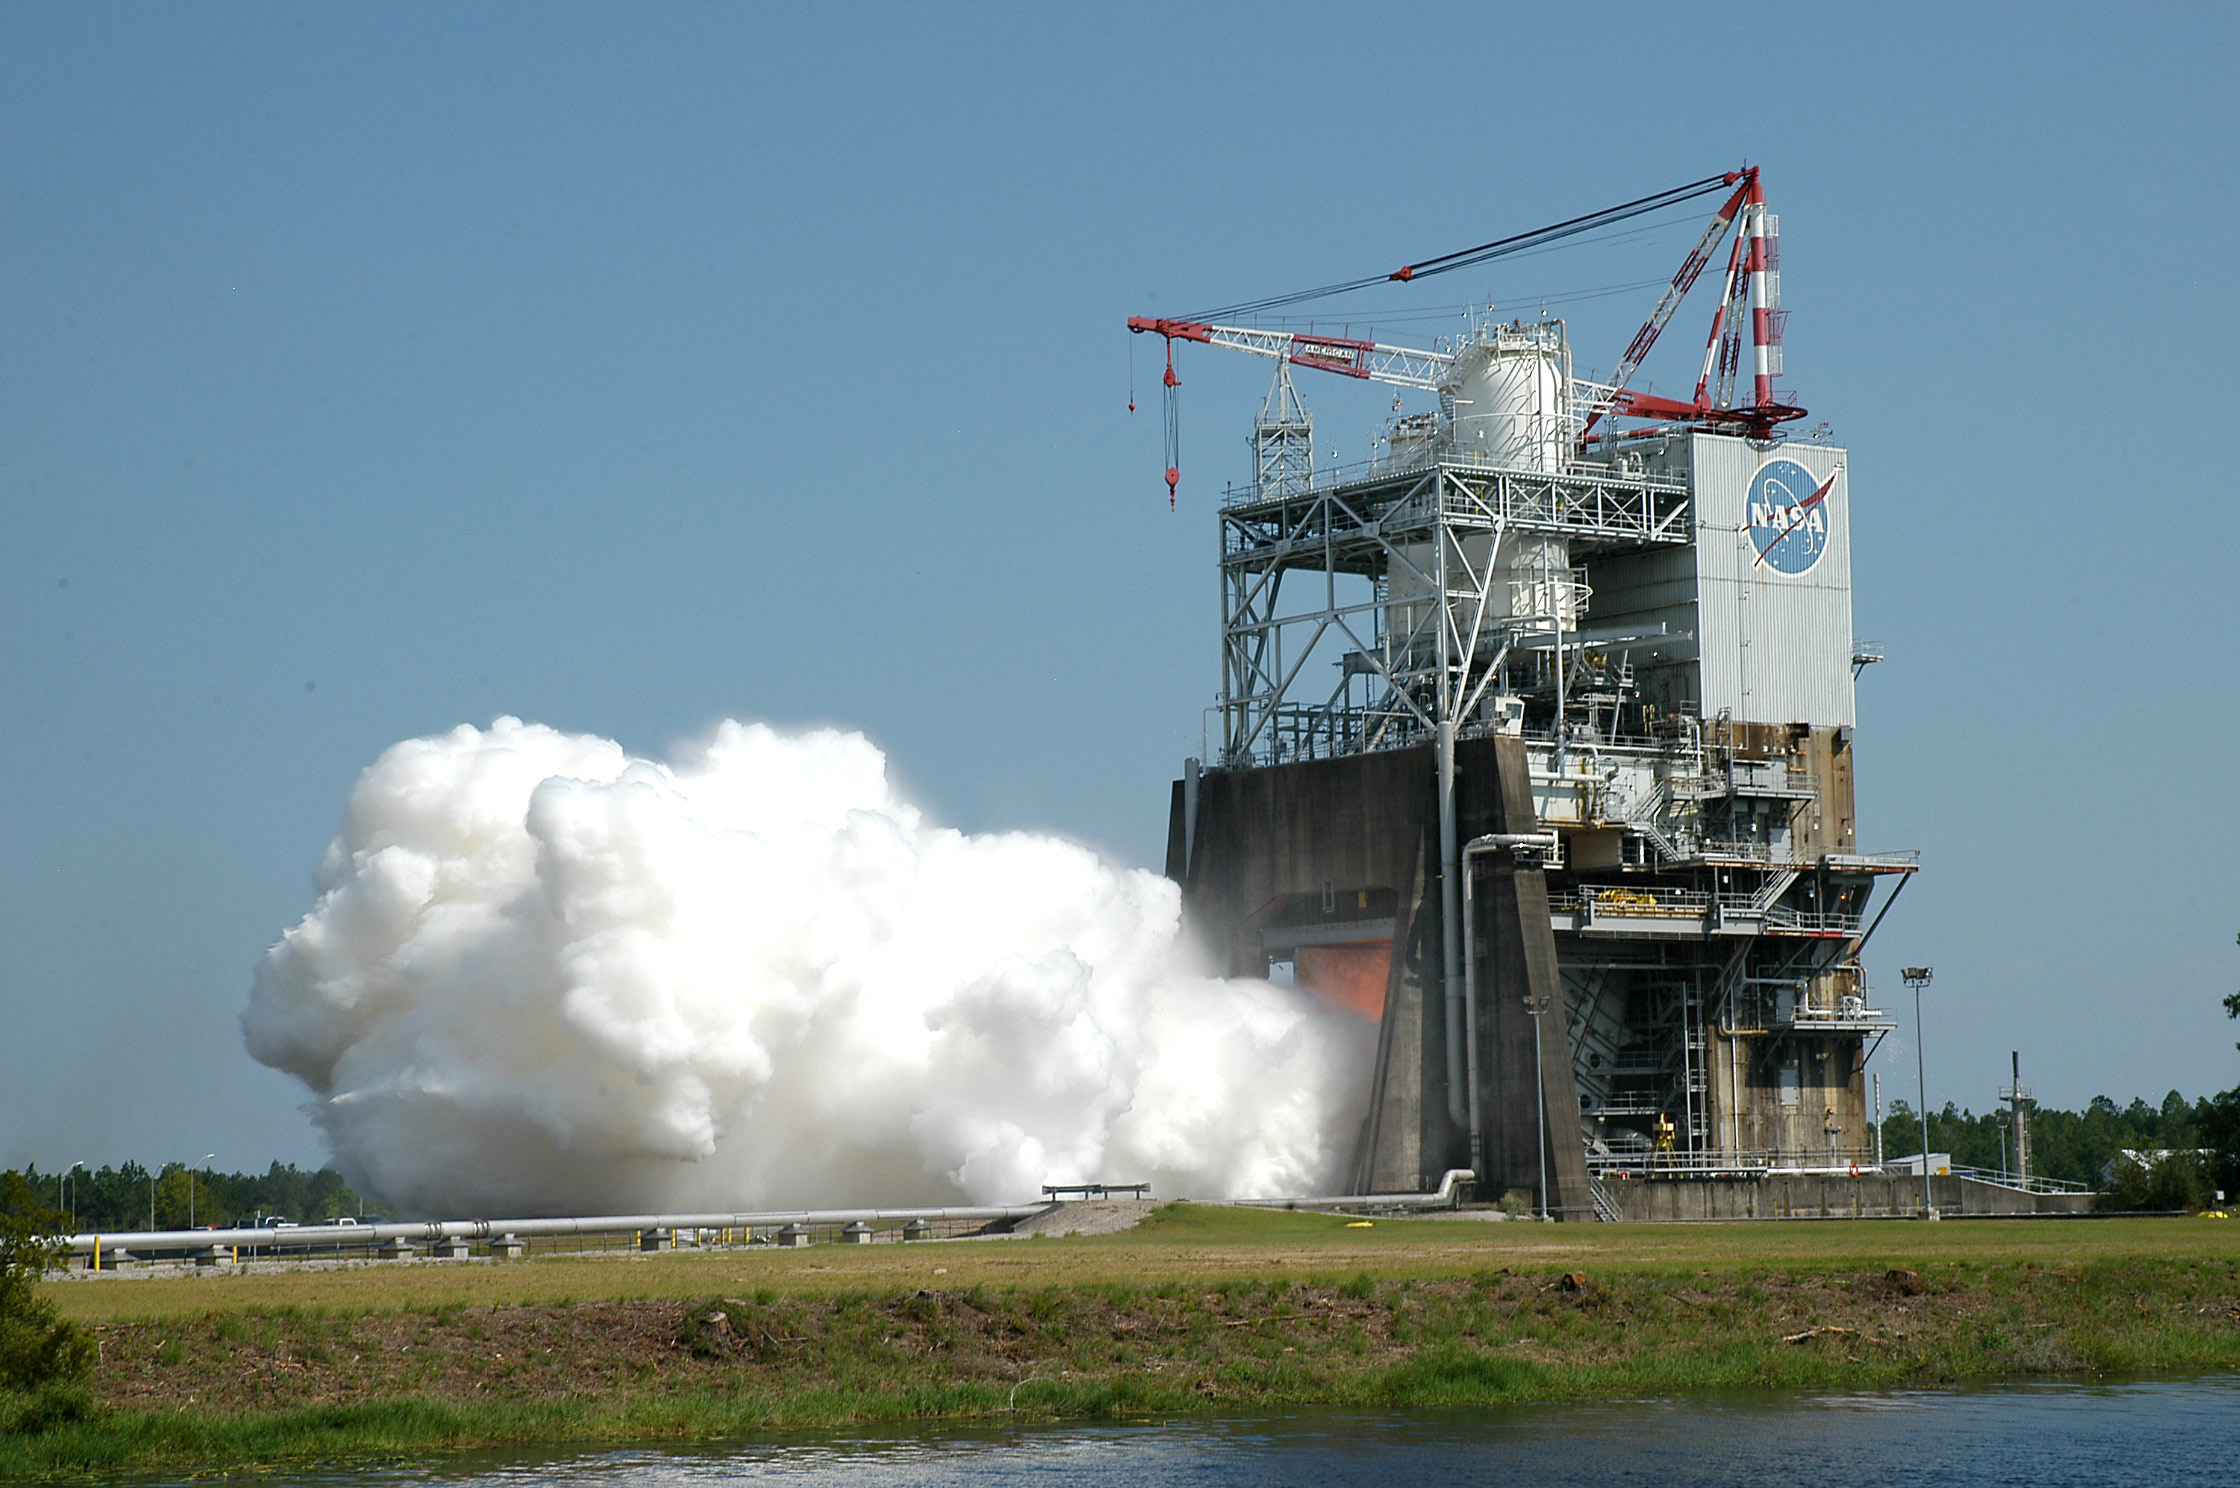 During a 535-second test on August 13, 2015, operators ran the Space Launch System (SLS) RS-25 rocket engine through a series of tests at different power levels to collect engine performance data on the A-1 test stand at NASA's Stennis Space Center near Bay St. Louis, Mississippi.  Credit: NASA   